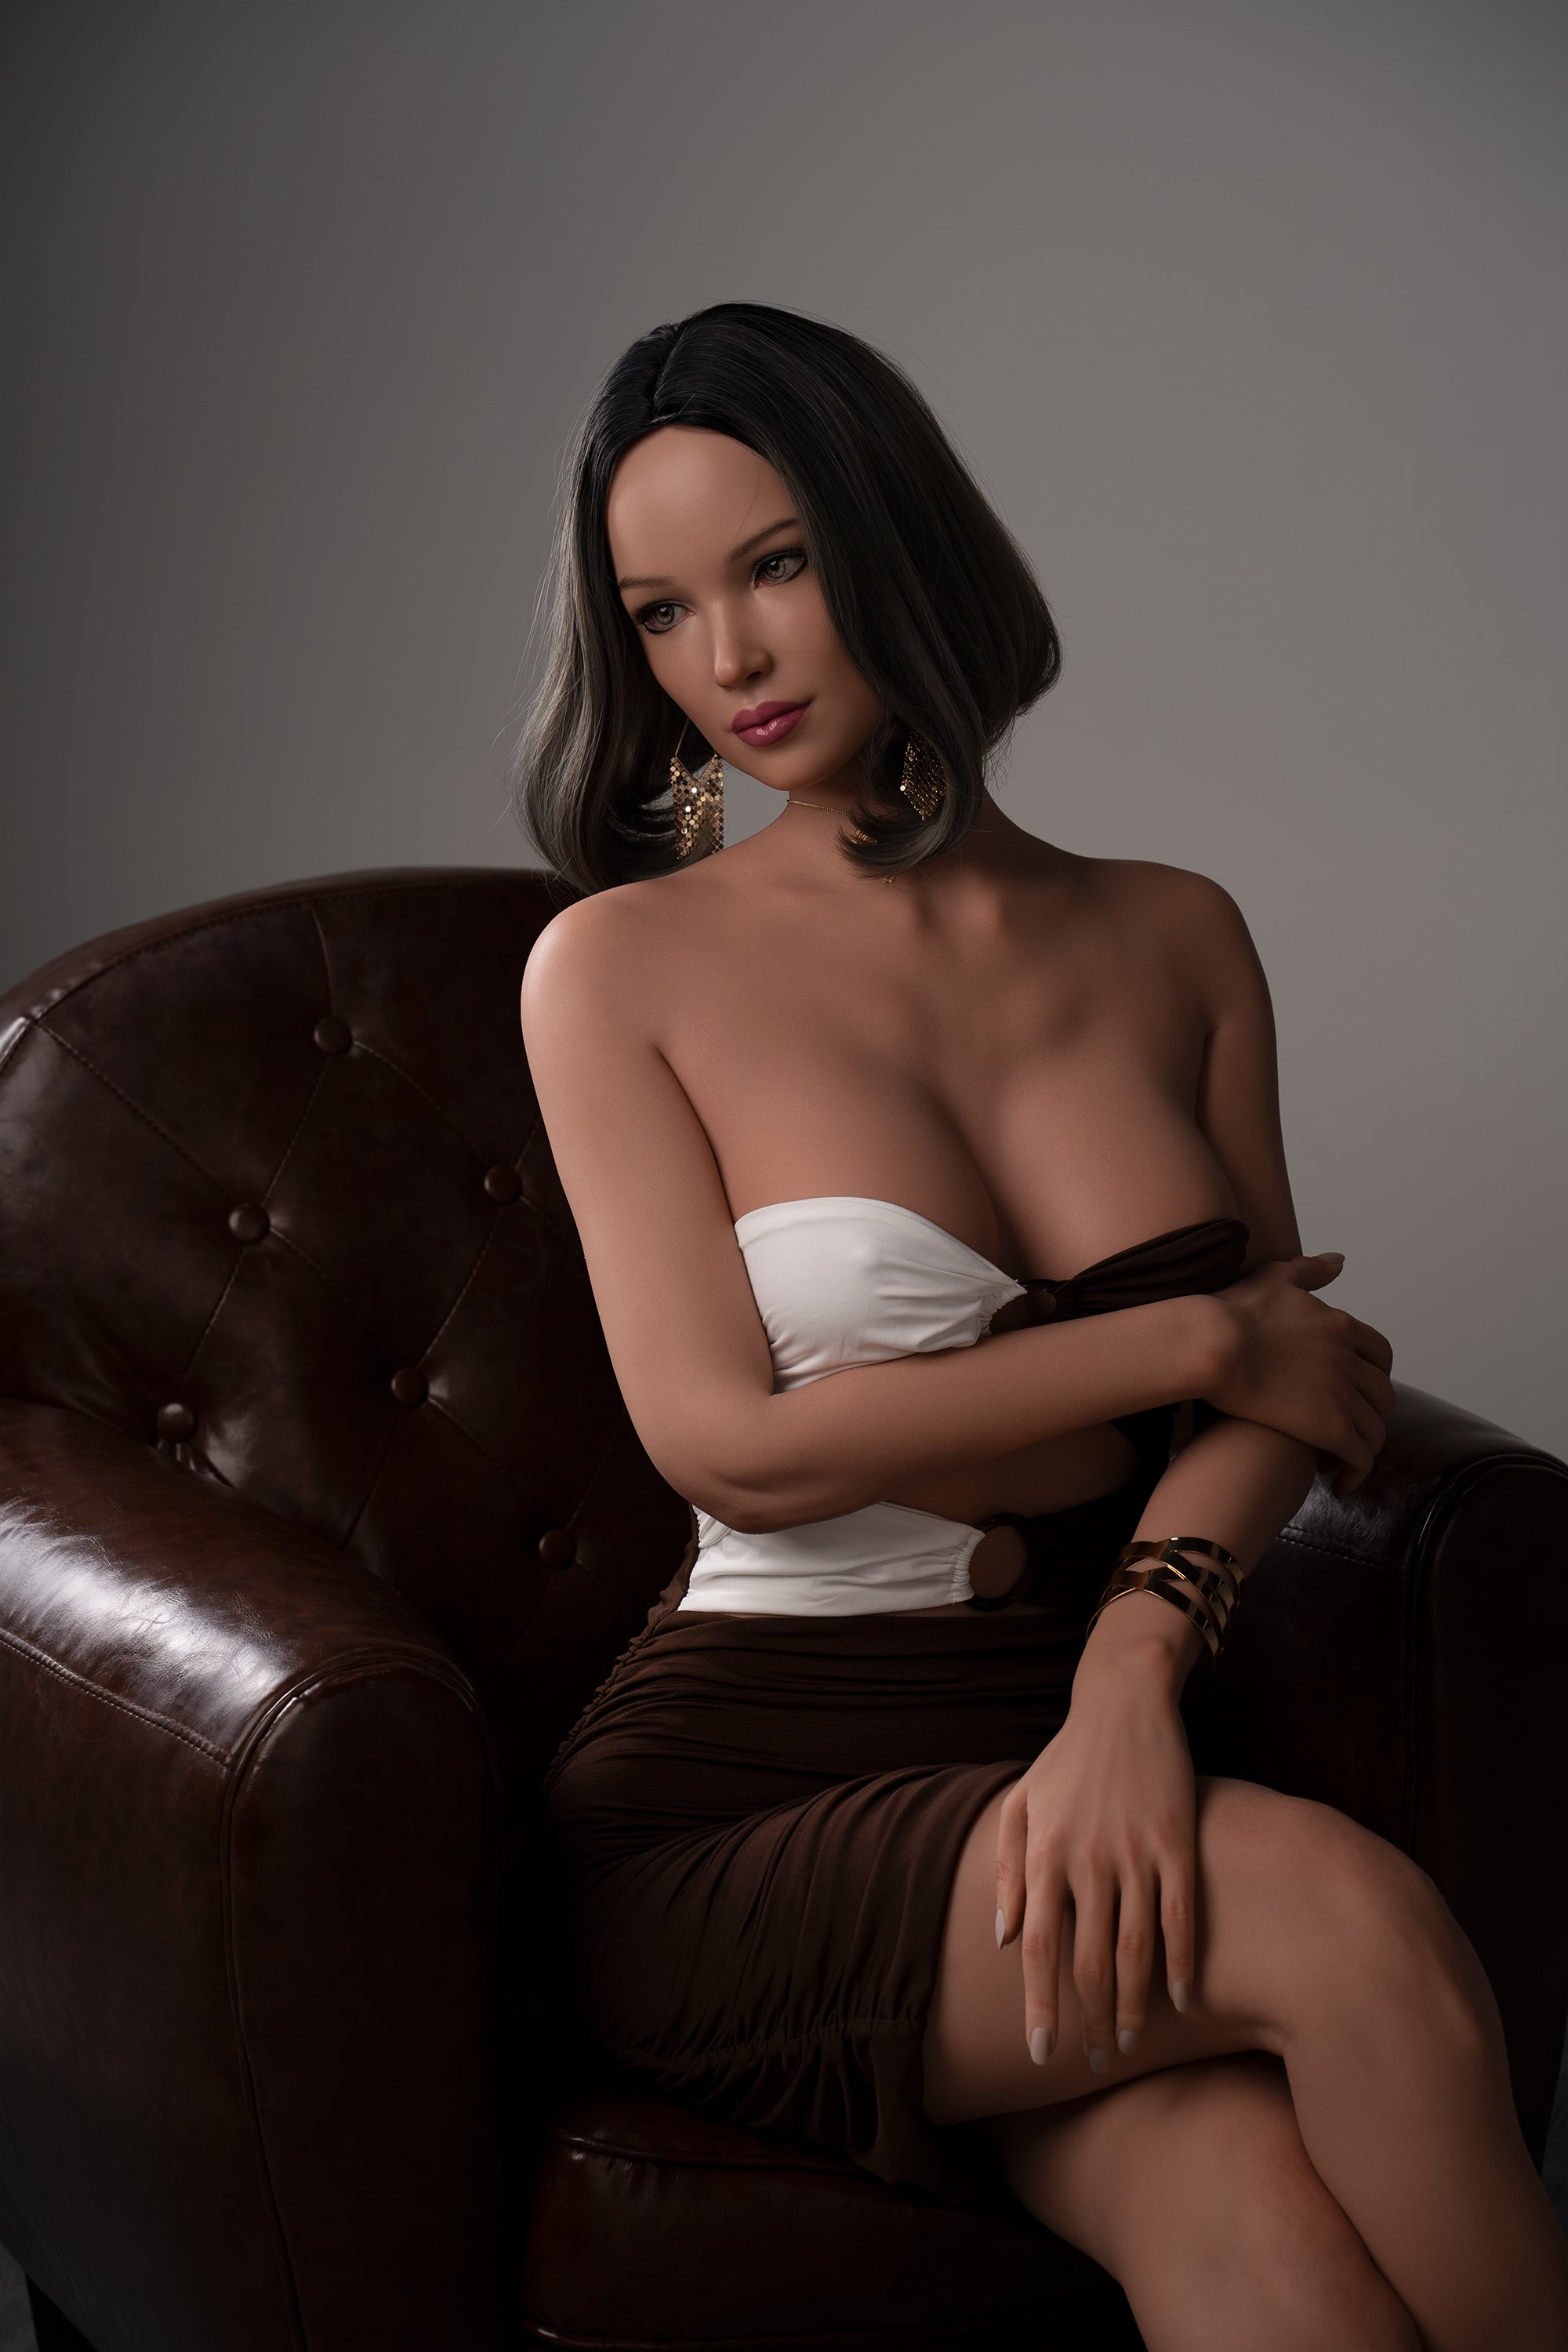 Zelex Doll 170 cm C Silicone - Baylor | Buy Sex Dolls at DOLLS ACTUALLY